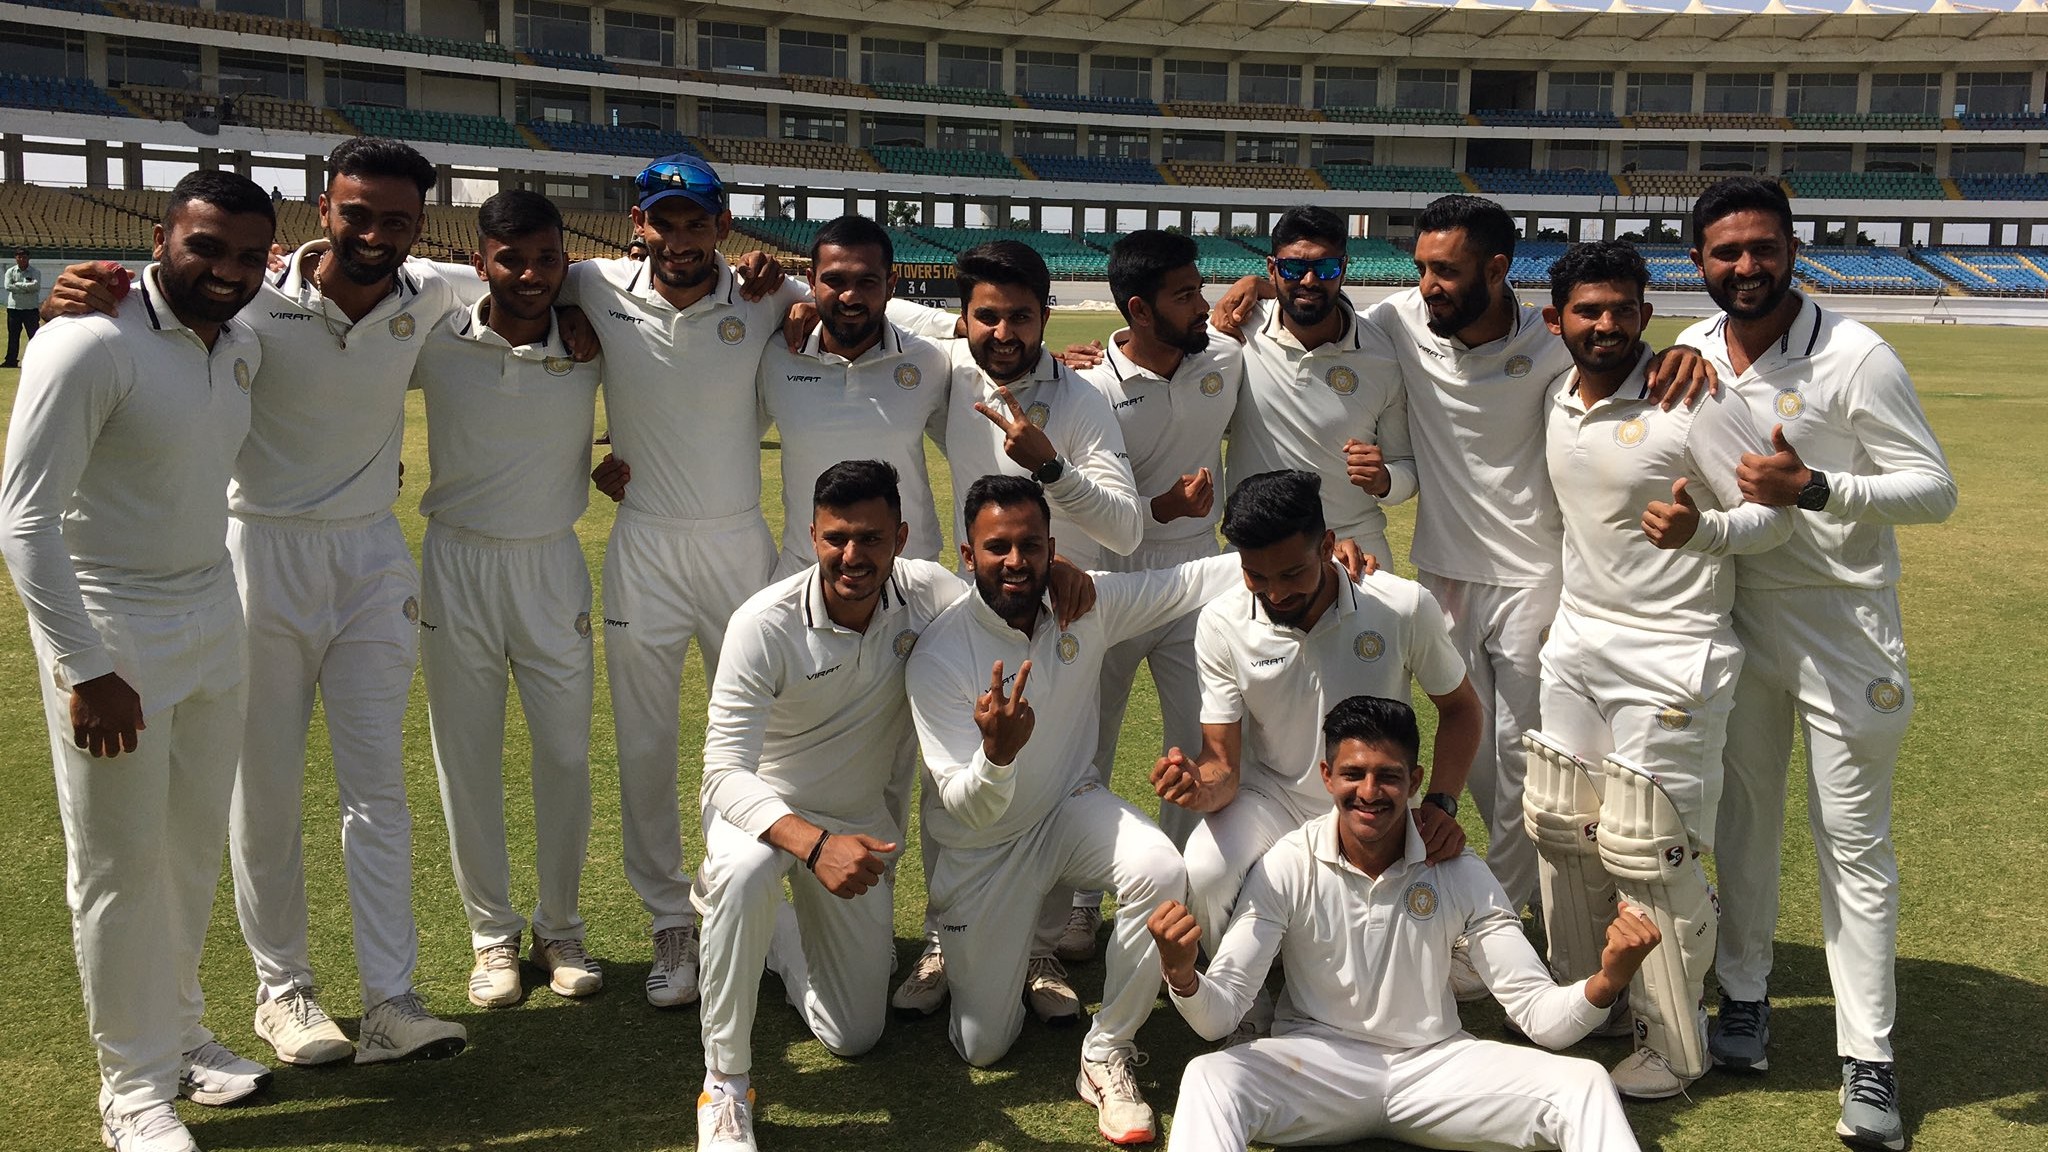 2020-21 Indian domestic season to see only Ranji Trophy, Syed Mushtaq Ali T20, says report 